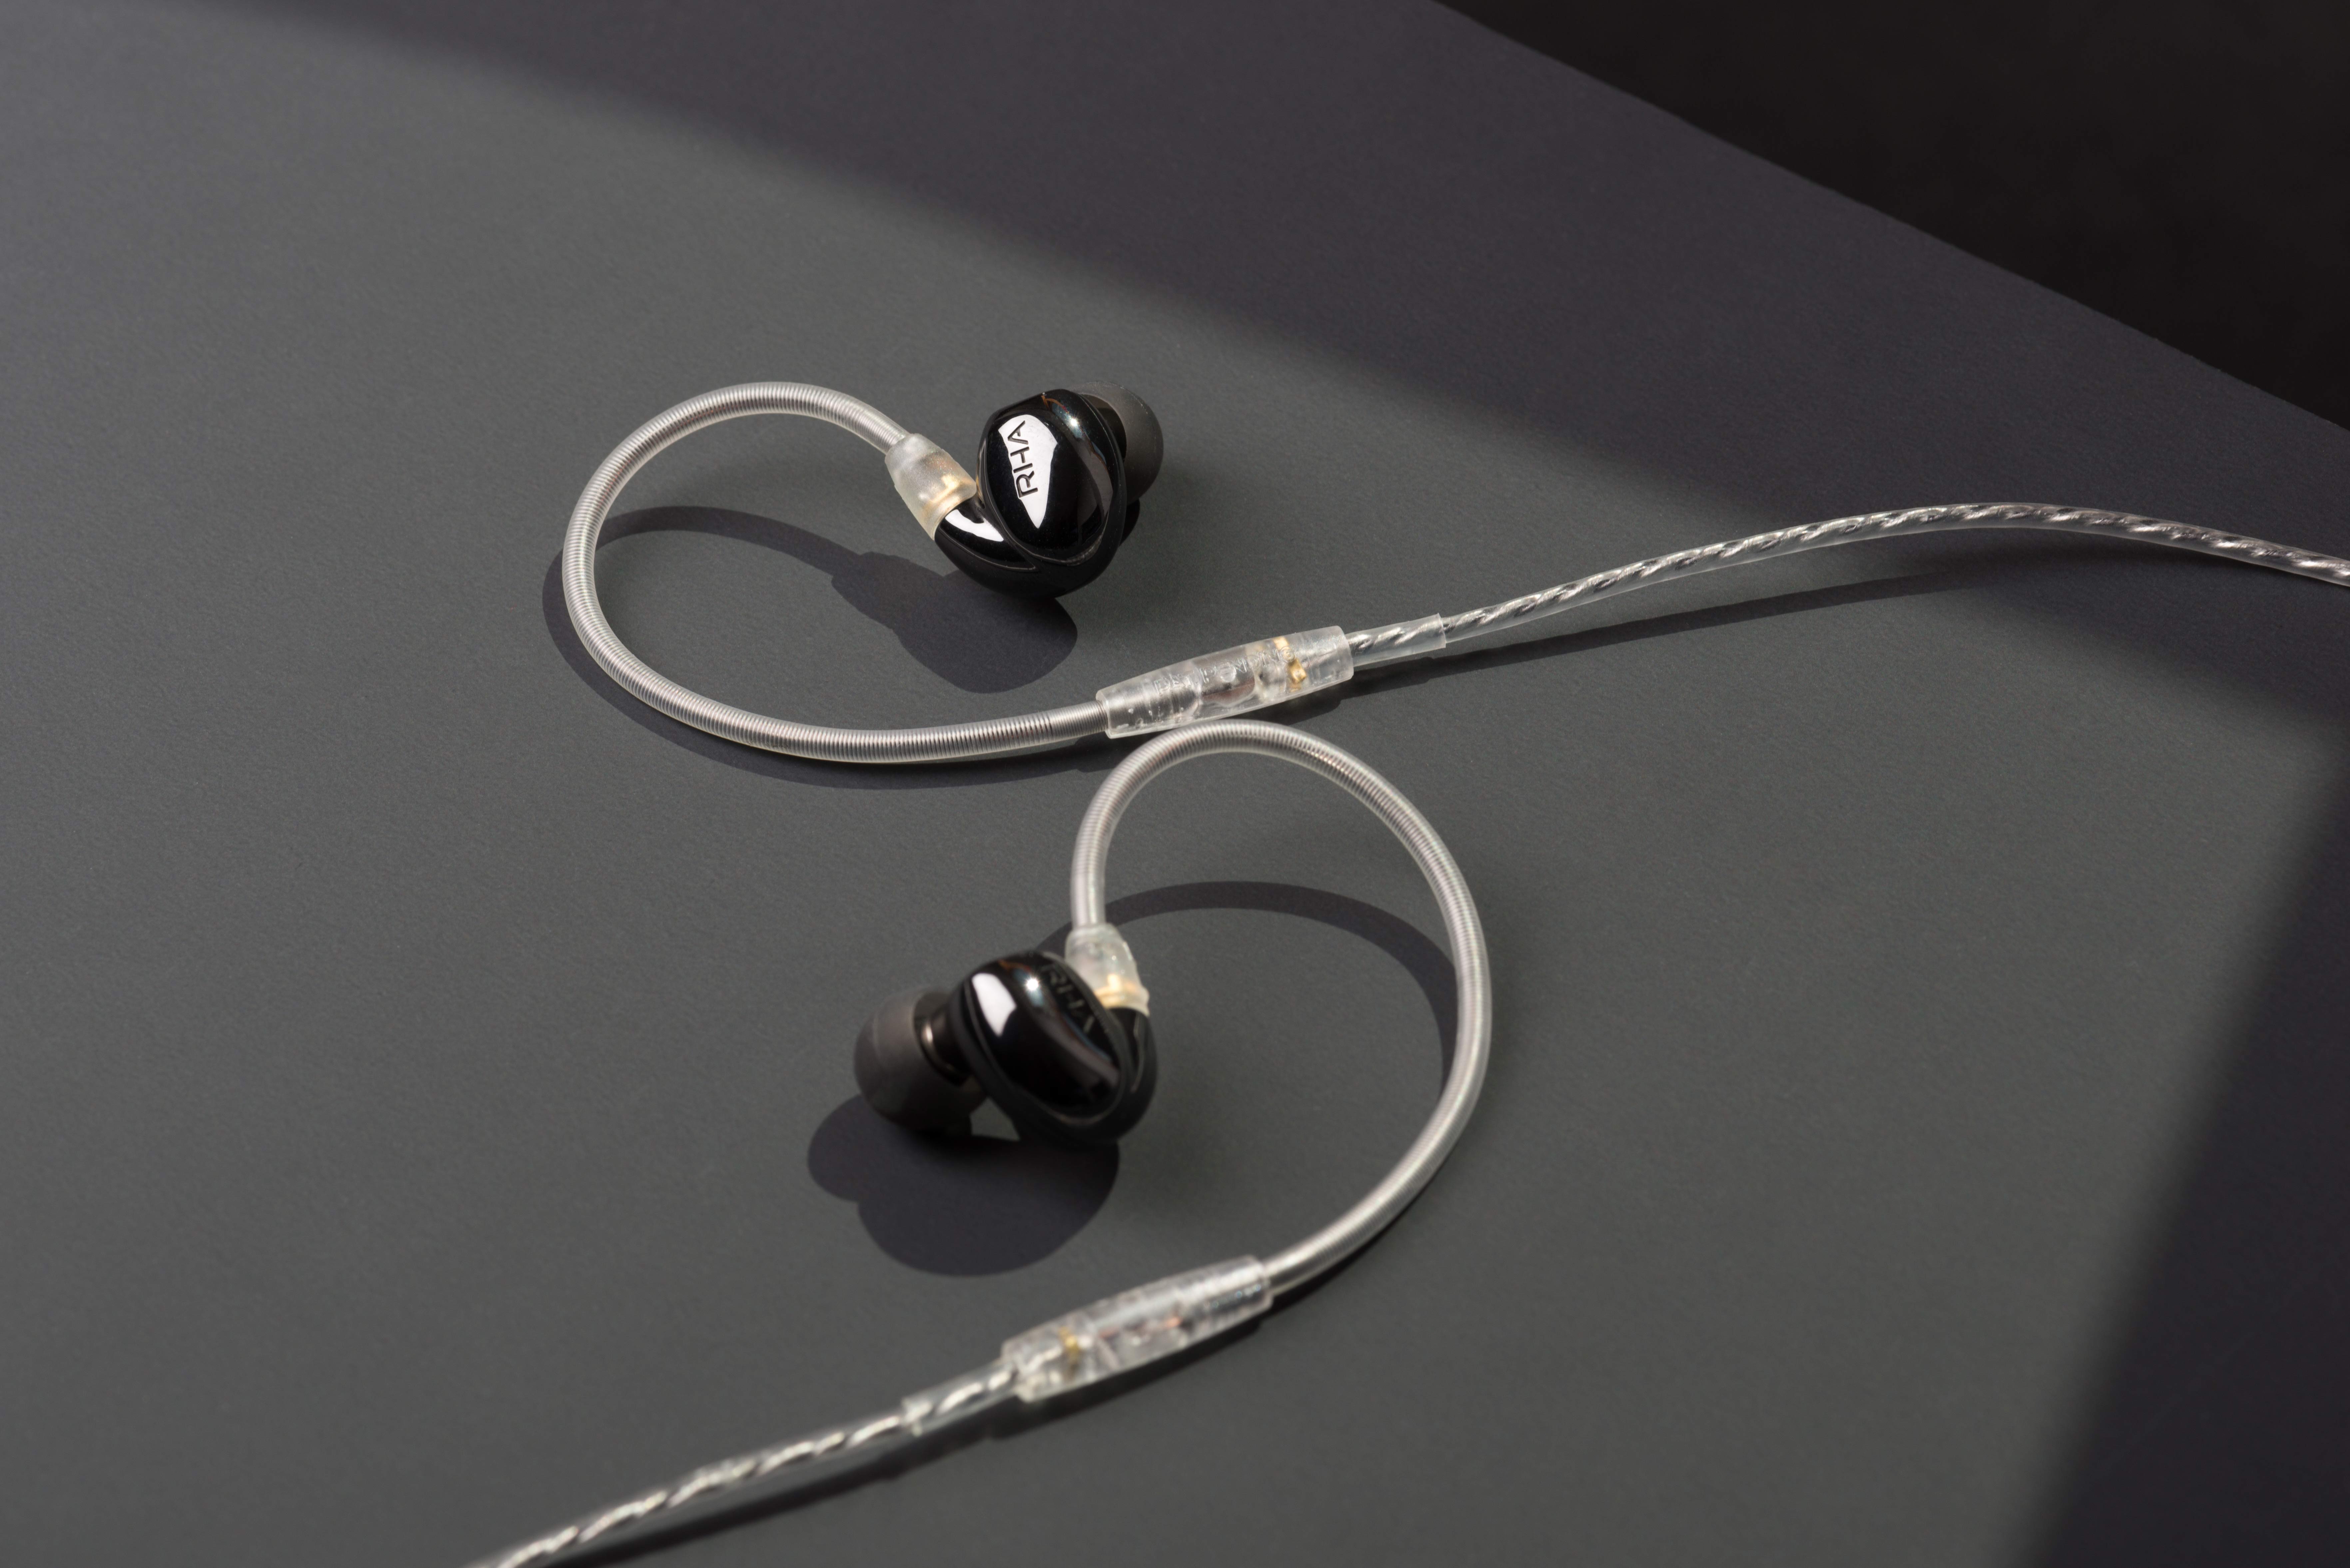 RHA CL2 Planar wireless planar magnetic earphones with MMCX cable attached.